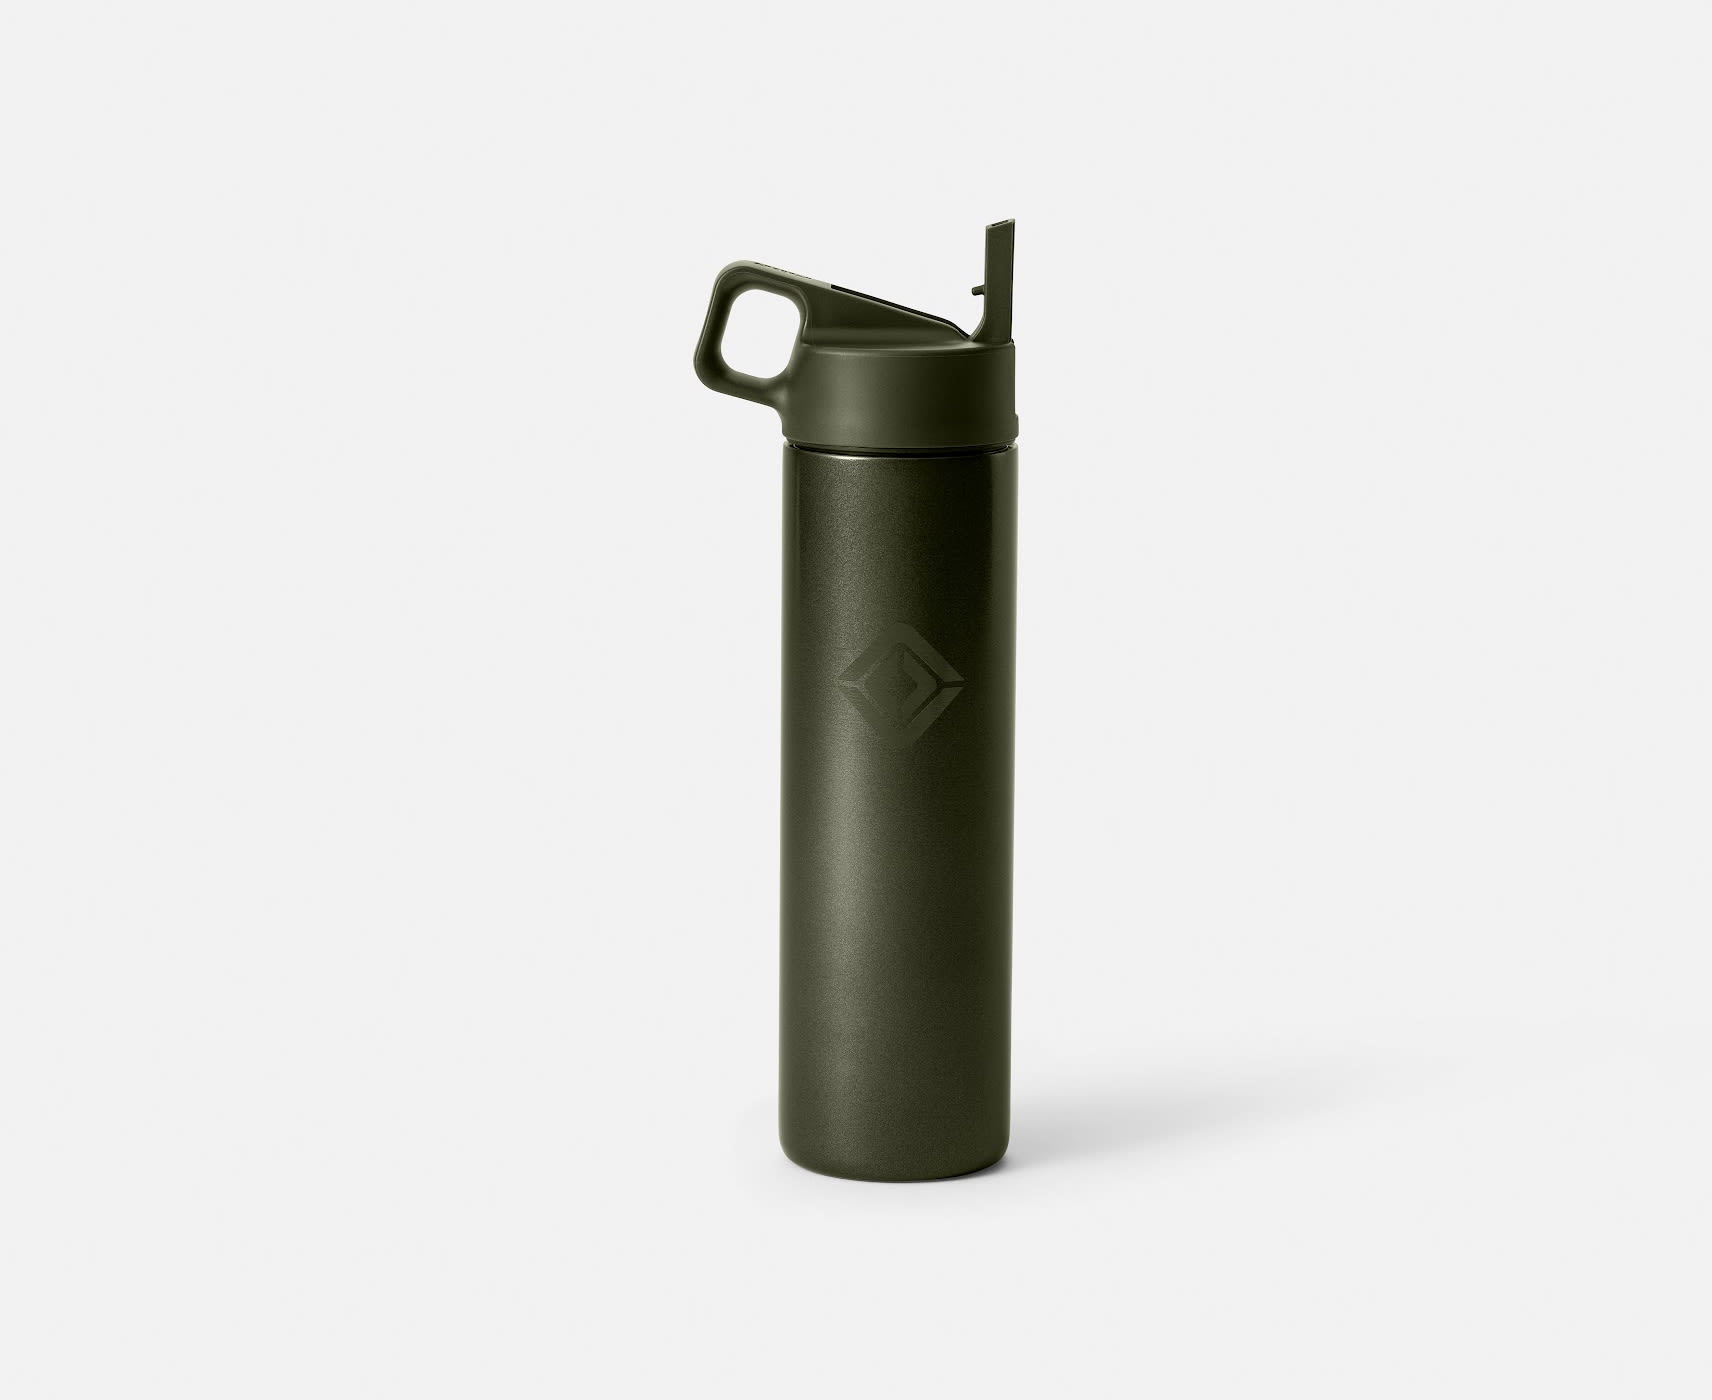 https://media.rivian.com/rivian-main/image/upload/f_auto,q_auto:eco/v1/rivian-com/gearshop/20%20oz%20Wide%20Mouth%20Bottle%20with%20Straw/Forest%20Green/20-oz-Wide-Mouth-Forest-Green-Primary-01_hu3a9u